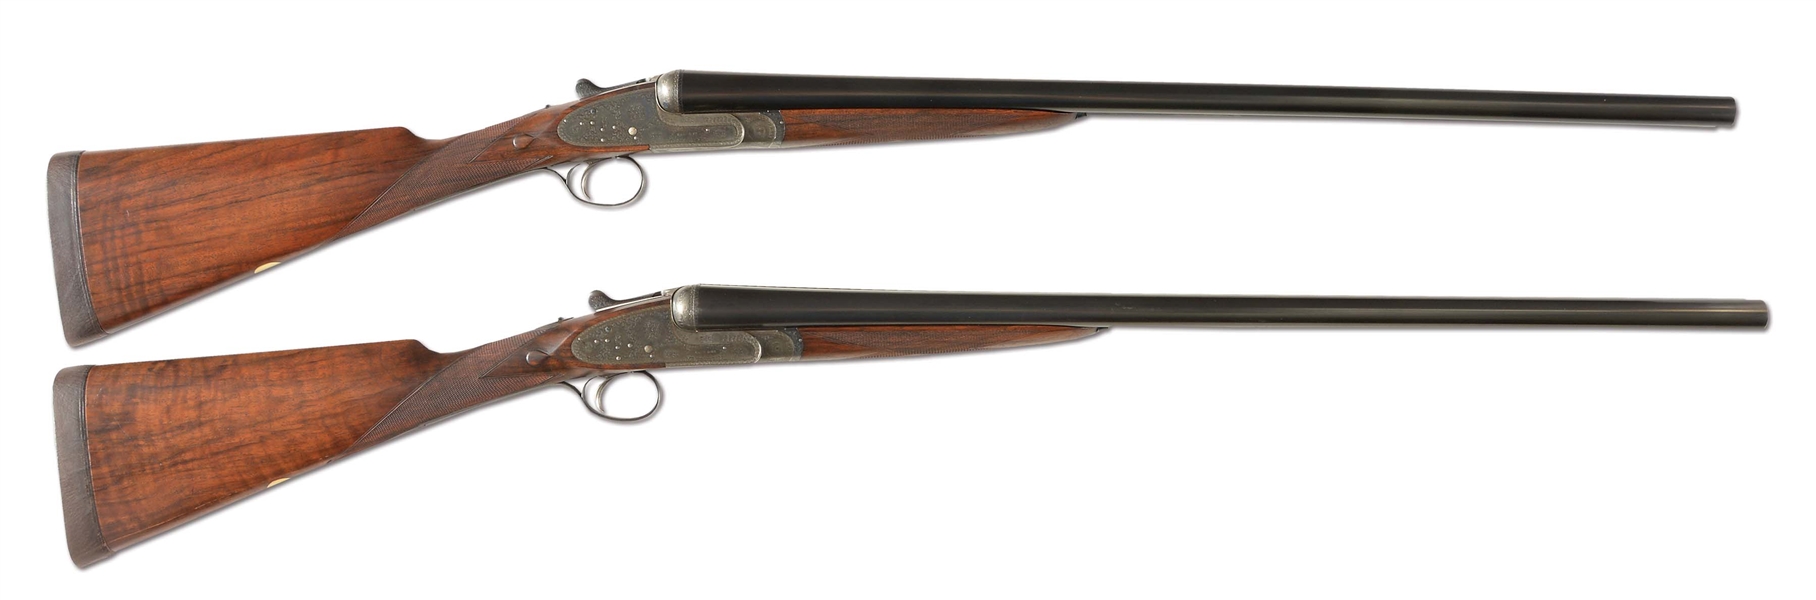 (C) LOVELY PAIR OF "GOLDEN AGE" BOSS EASY OPENING SIDELOCK EJECTOR SINGLE TRIGGER GAME GUNS WITH CASE MADE FOR MARSHALL FIELD IV WITH 27" BARRELS TO SHOOT "TRUE CYLINDER".